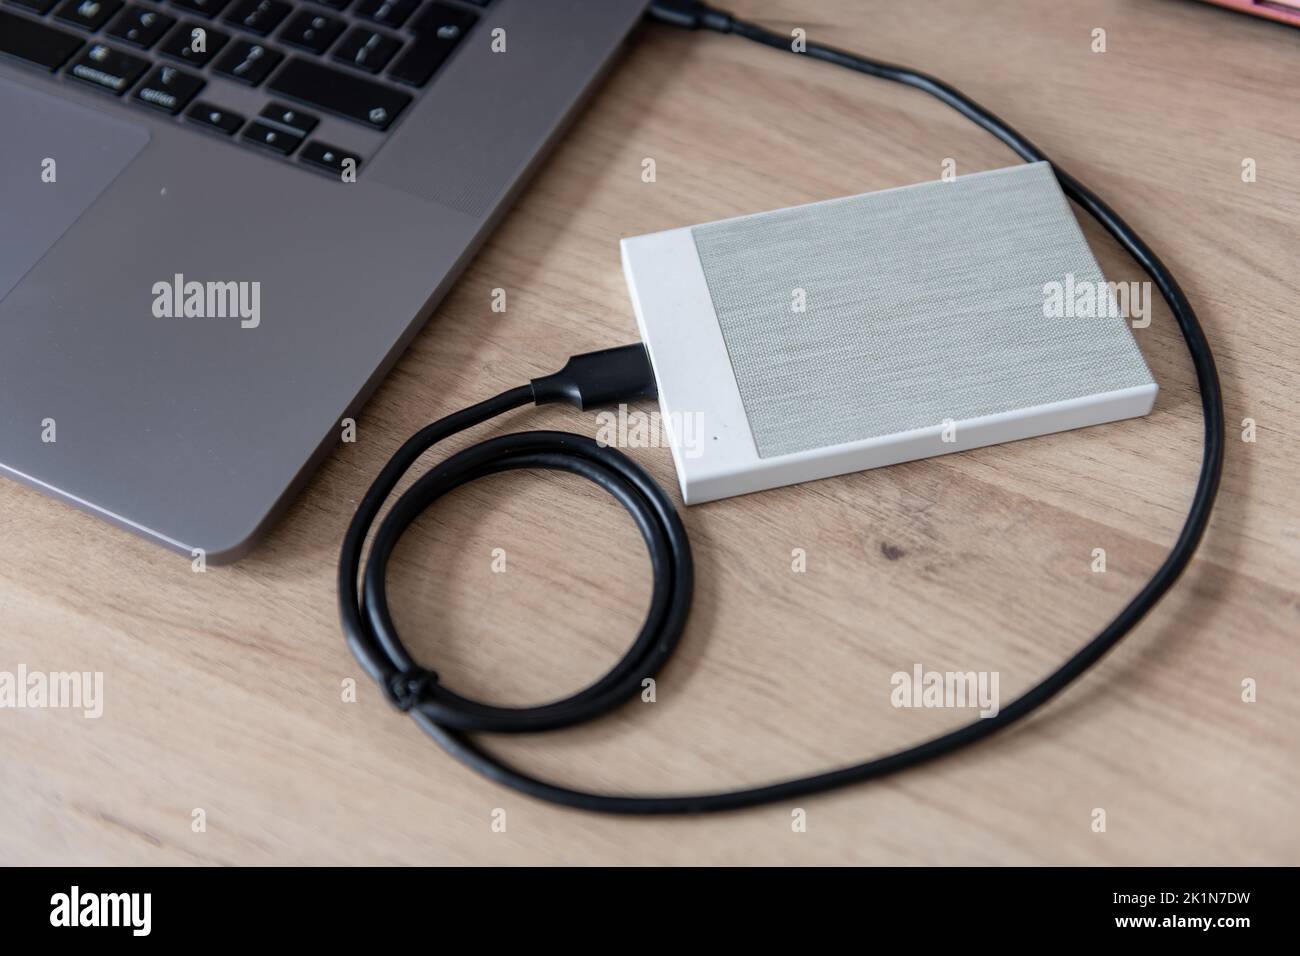 A external hard drive, file storage device connected to a laptop computer. Stock Photo